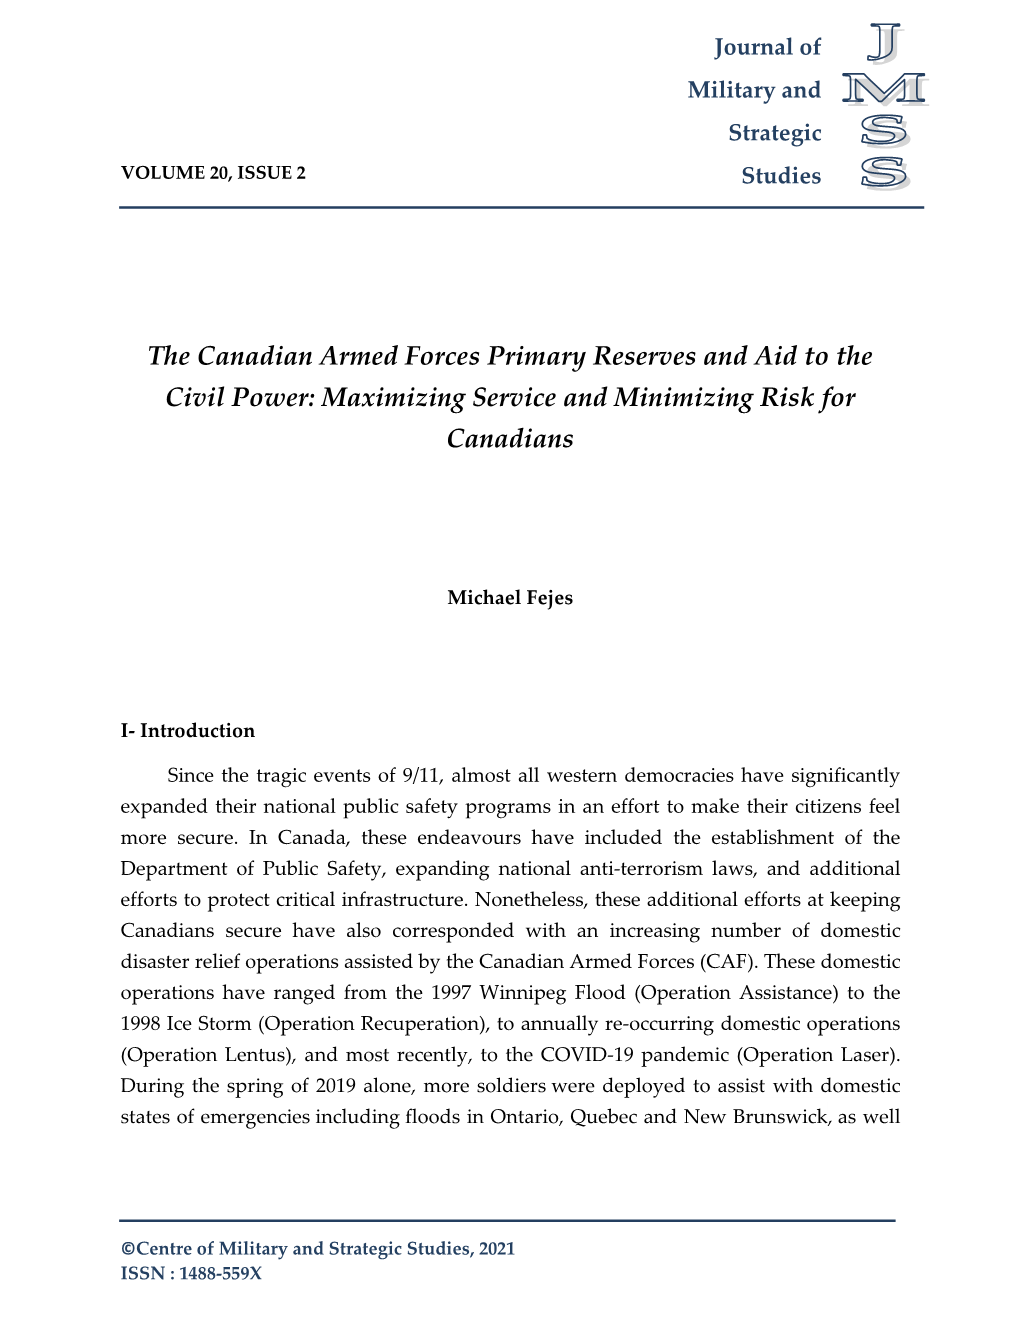 The Canadian Armed Forces Primary Reserves and Aid to the Civil Power: Maximizing Service and Minimizing Risk for Canadians